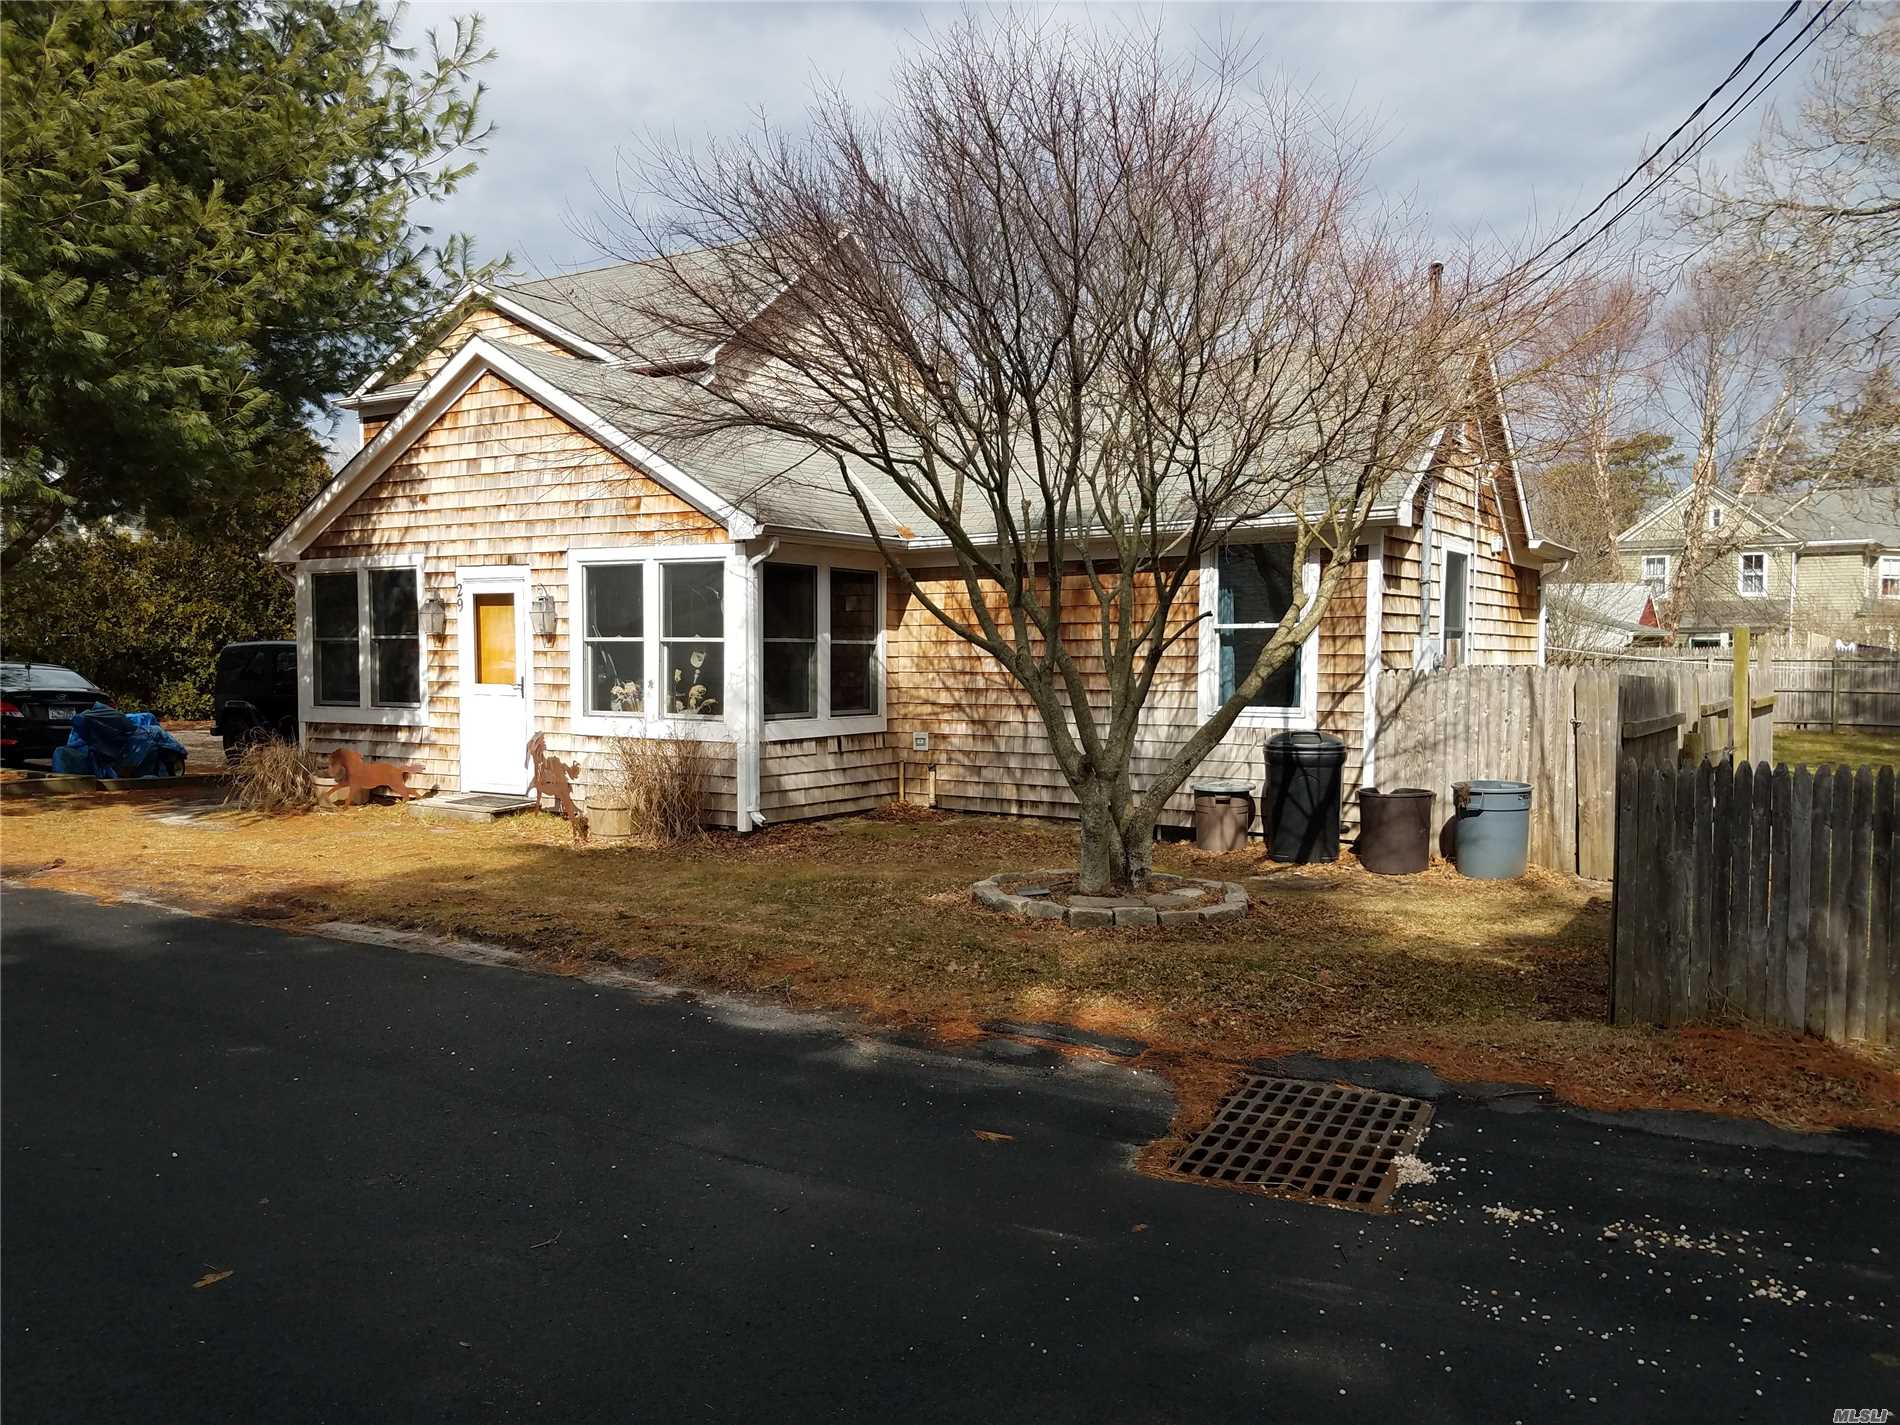 This Cozy East Quogue Home Is On Dead End Street, Conveniently Located Near The Village And Has A Legal Studio Apartment With Kitchen And Full Bath Adjoining The Detached Garage. The Main House Features Enclosed Front Porch, 3 Bedrooms, 2 Full Baths, Living Room W/Fireplace, Kitchen With Dining Area, Additional Living Room With Wood Burning Stove, Large Basement And Very Nice Hot Tub